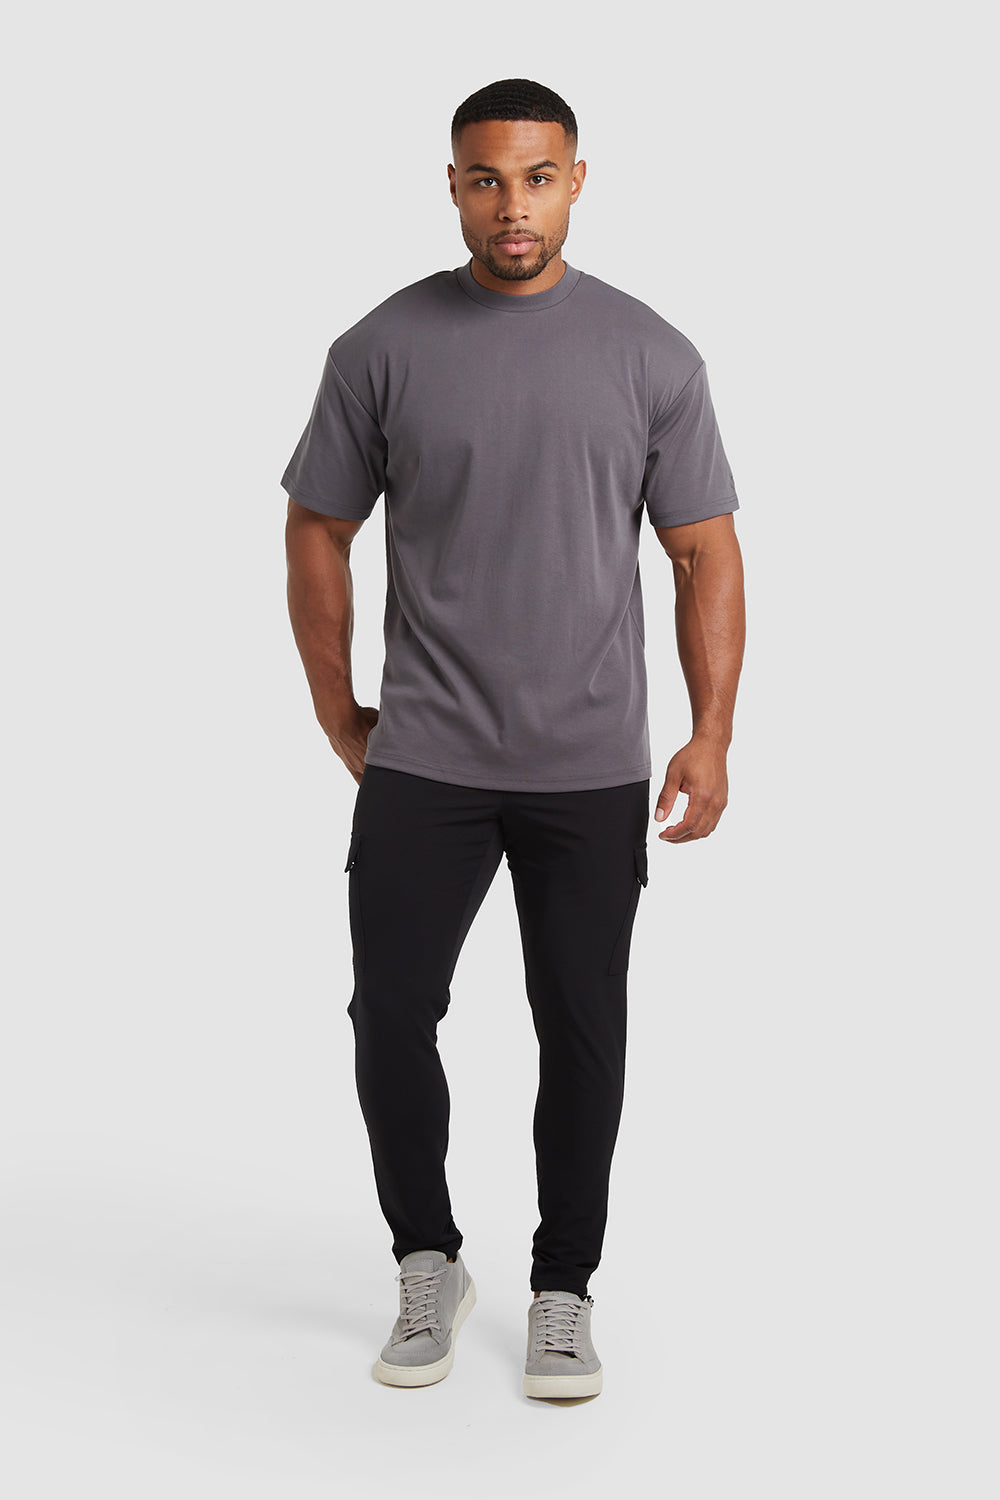 Boxy Fit T-Shirt in Lead - TAILORED ATHLETE - ROW